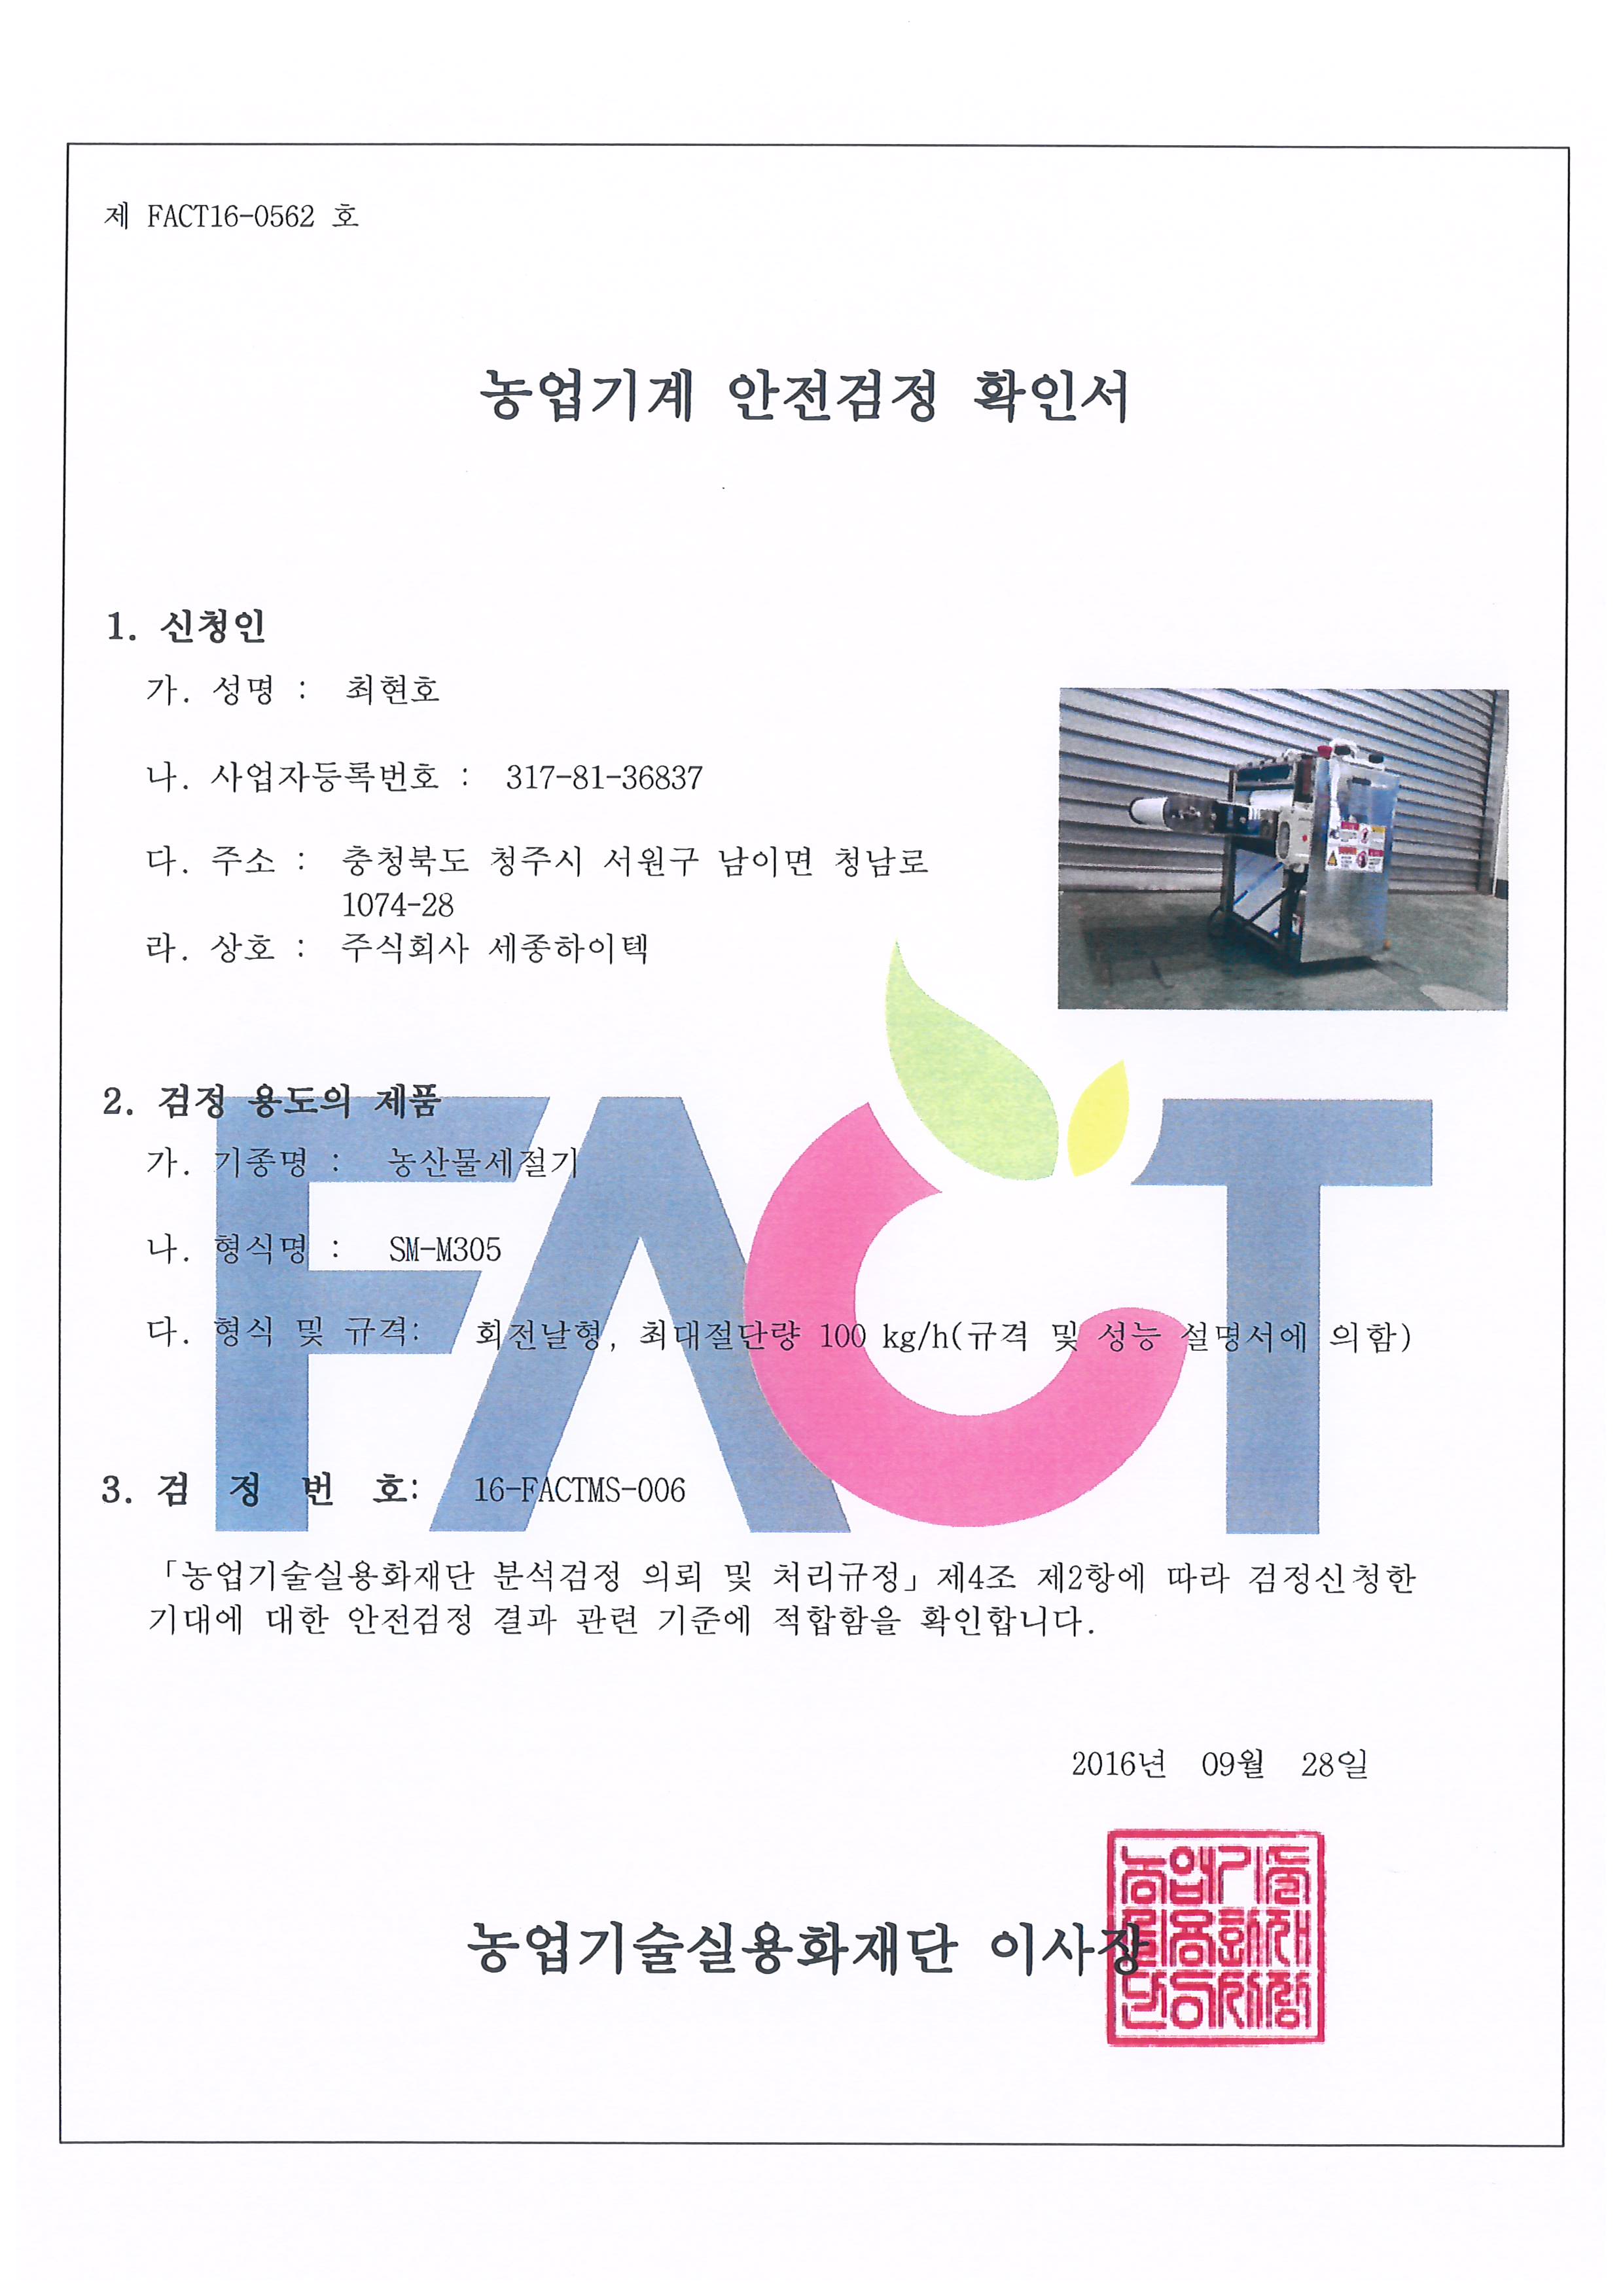 Certification-Agricultural machinery safety inspection certificate-M305 [첨부 이미지1]